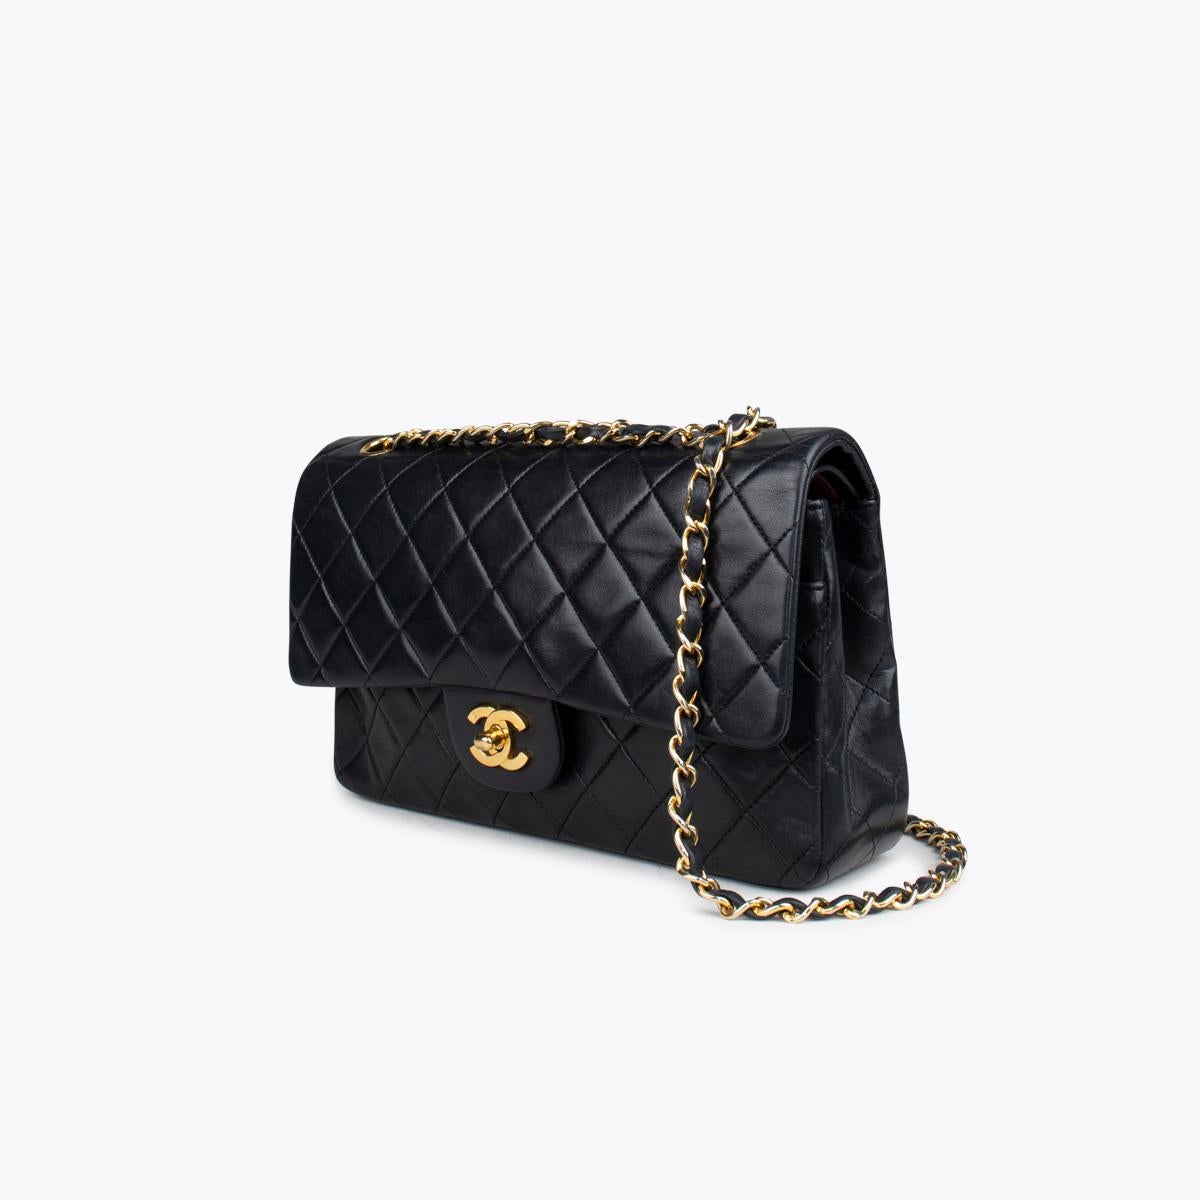 Black quilted lambskin Chanel Medium Classic Double Flap bag with

– Gold-tone hardware
– Convertible chain-link and leather shoulder strap
– Burgundy leather lining
– Single patch pocket at back
– Single zip pocket at flap underside, three